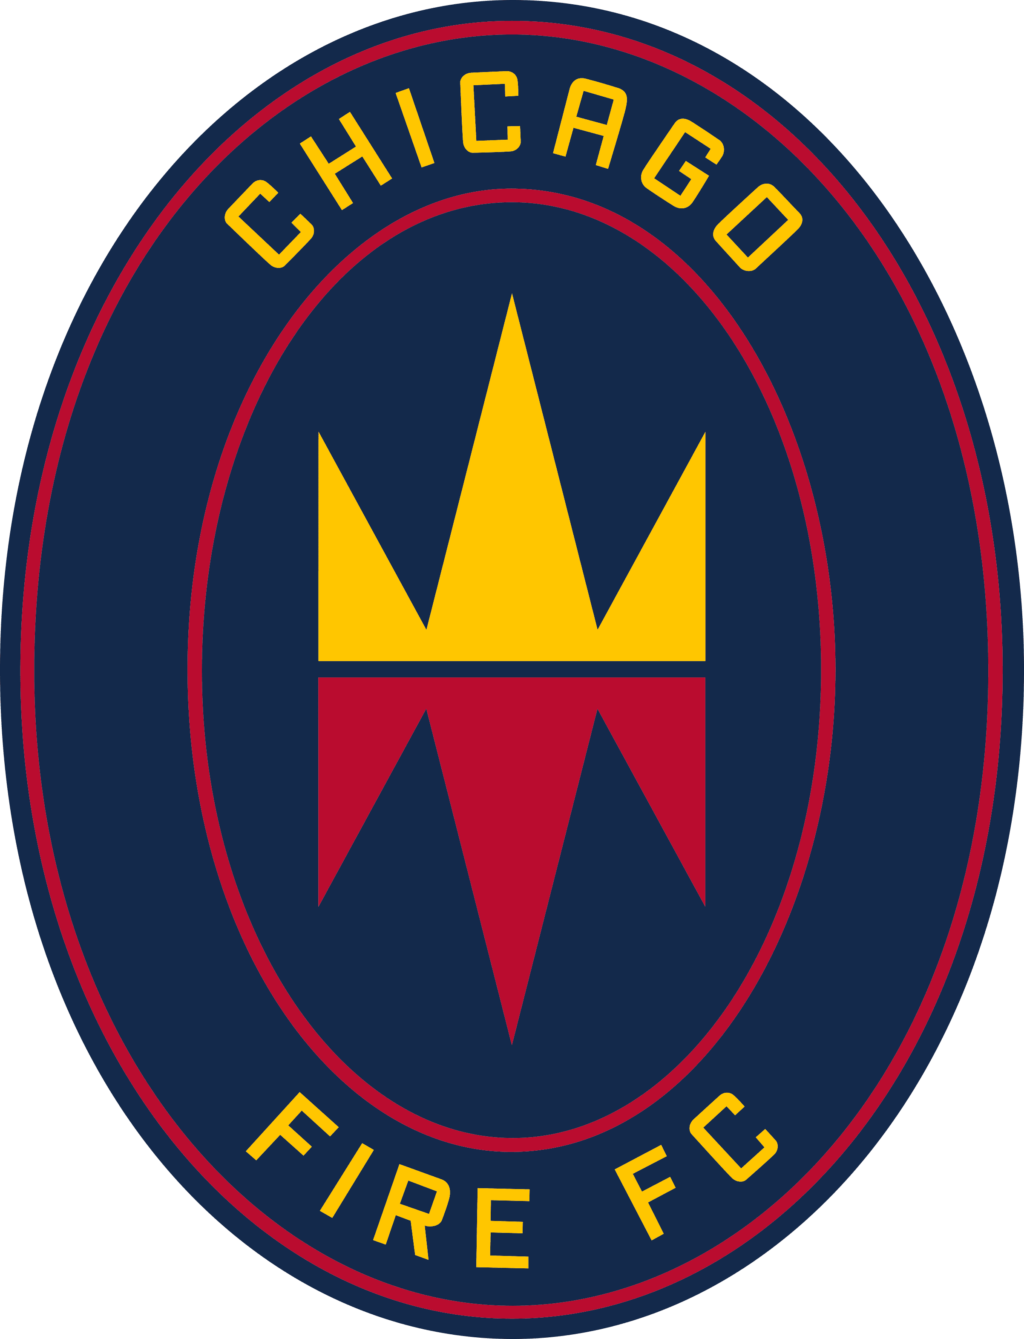 chicago fire 01 12 Styles MLS Chicago Fire Svg, Chicago Fire Svg, Chicago Fire Vector Logo, Chicago Fire soccer Clipart, Chicago Fire png, Chicago Fire cricut files,football svg.